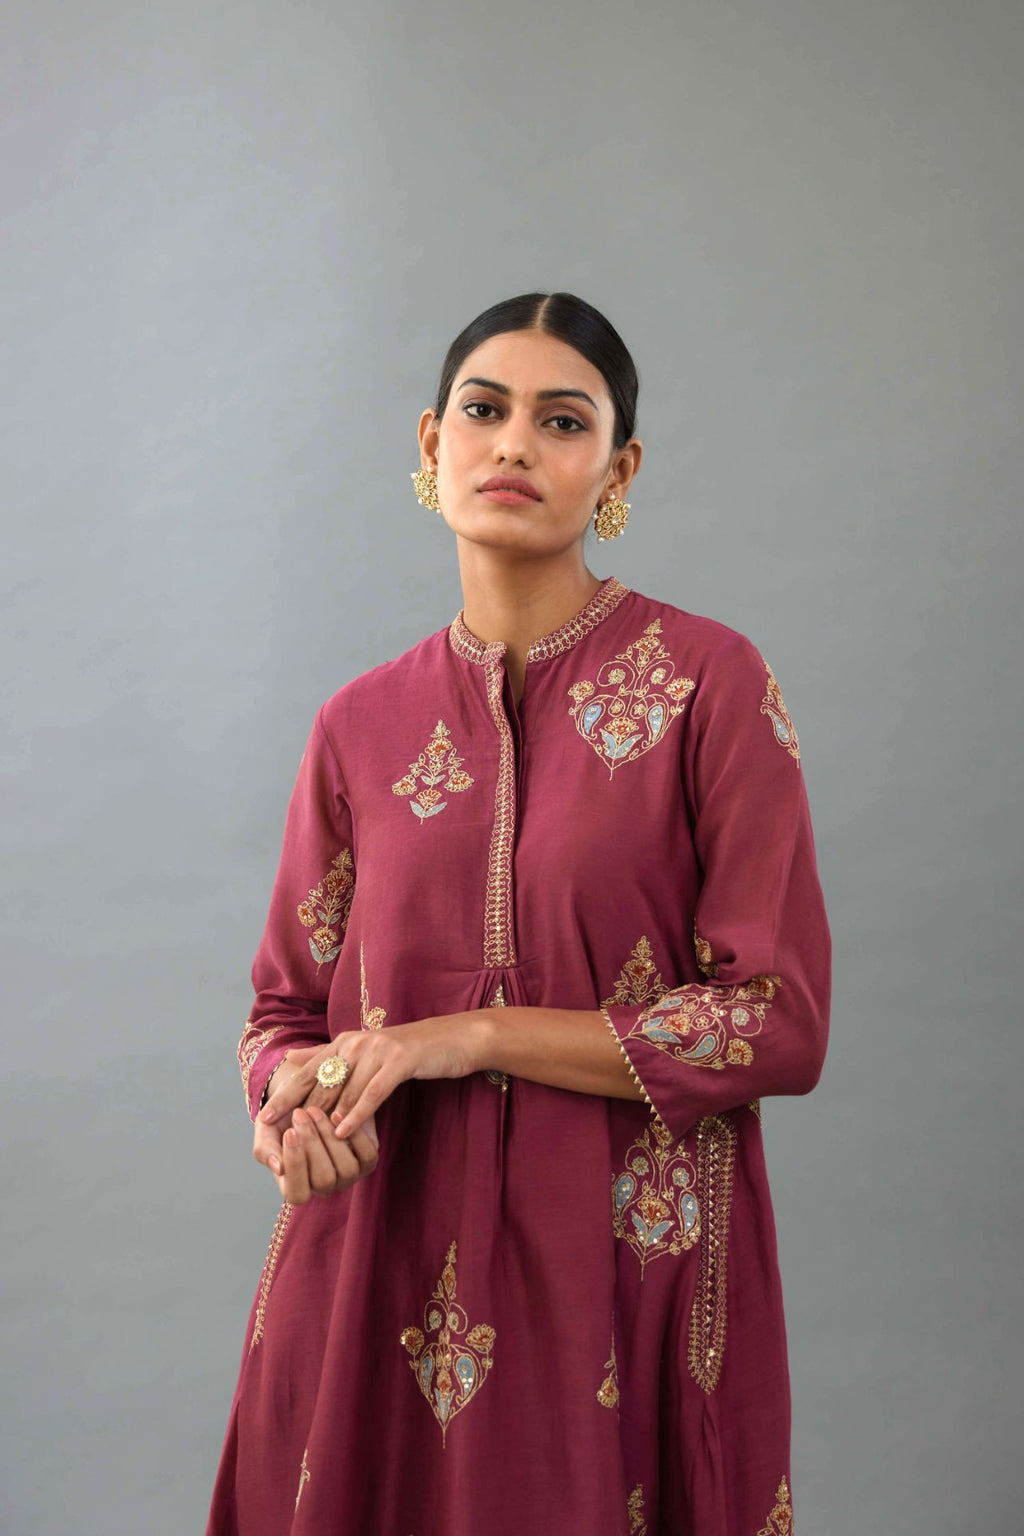 Wine Silk Chanderi short kurta set with collar and front placket, detailed with delicate gold embroidery is done around the placket and collar.